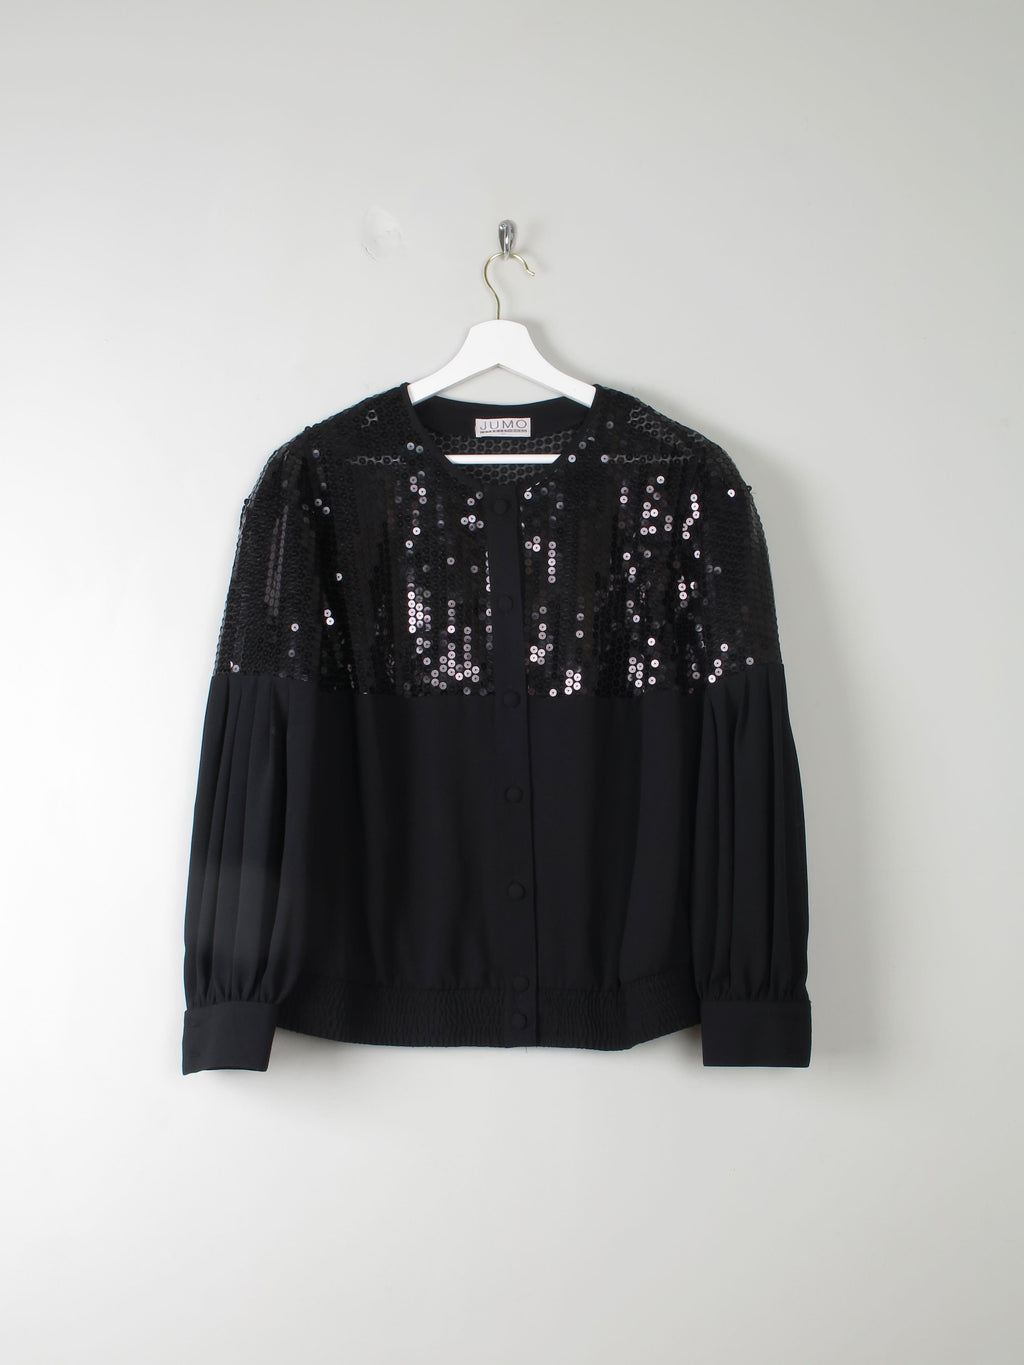 Women's Vintage Jacket With Sequin Detail M/L - The Harlequin